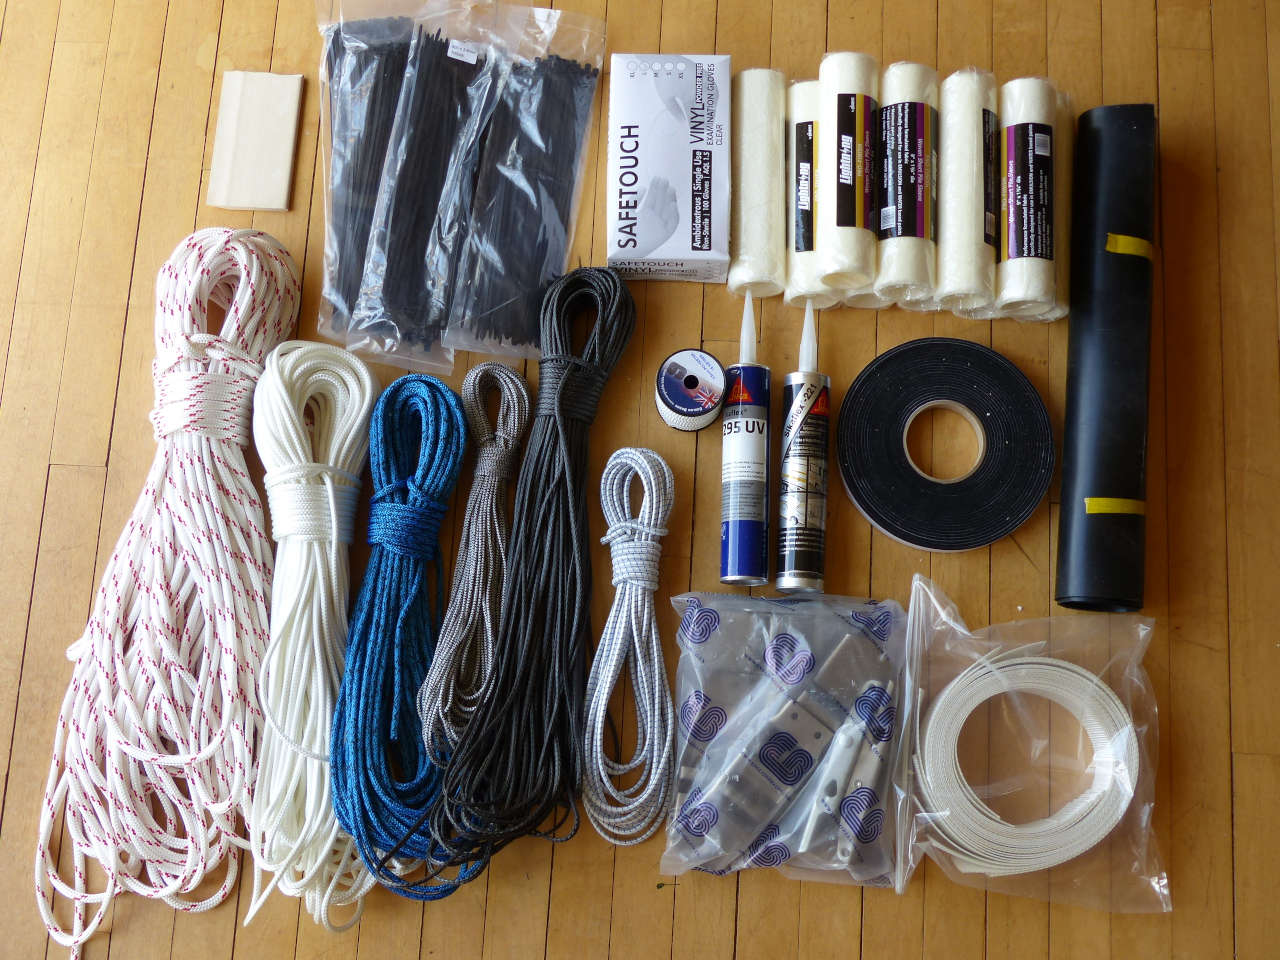 Bags of ropes, glue, tape, gloves